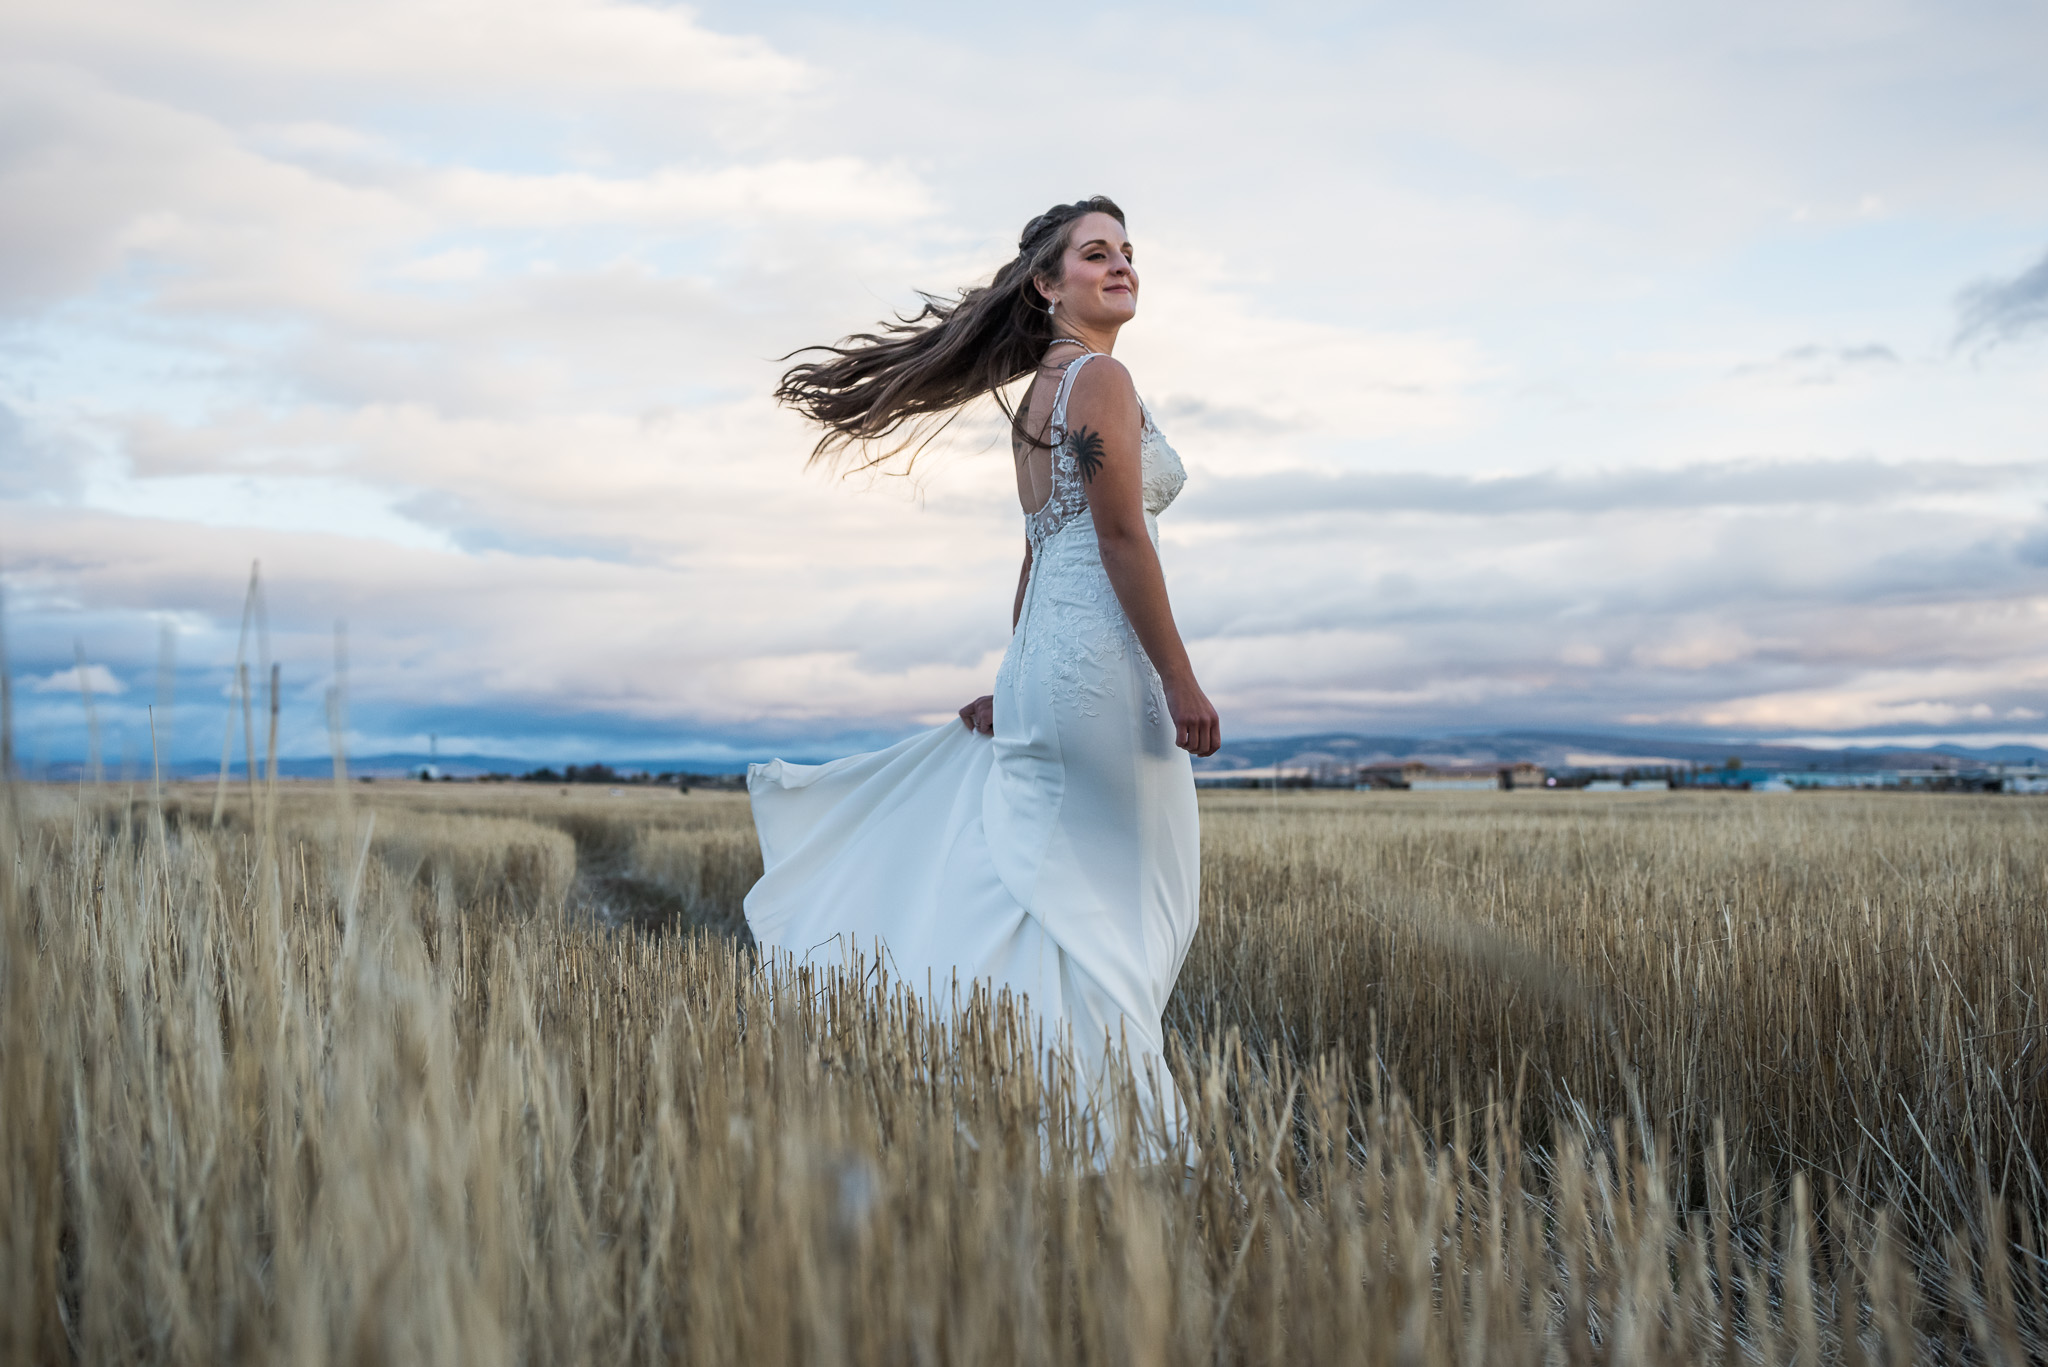 outdoor portrait photography tips